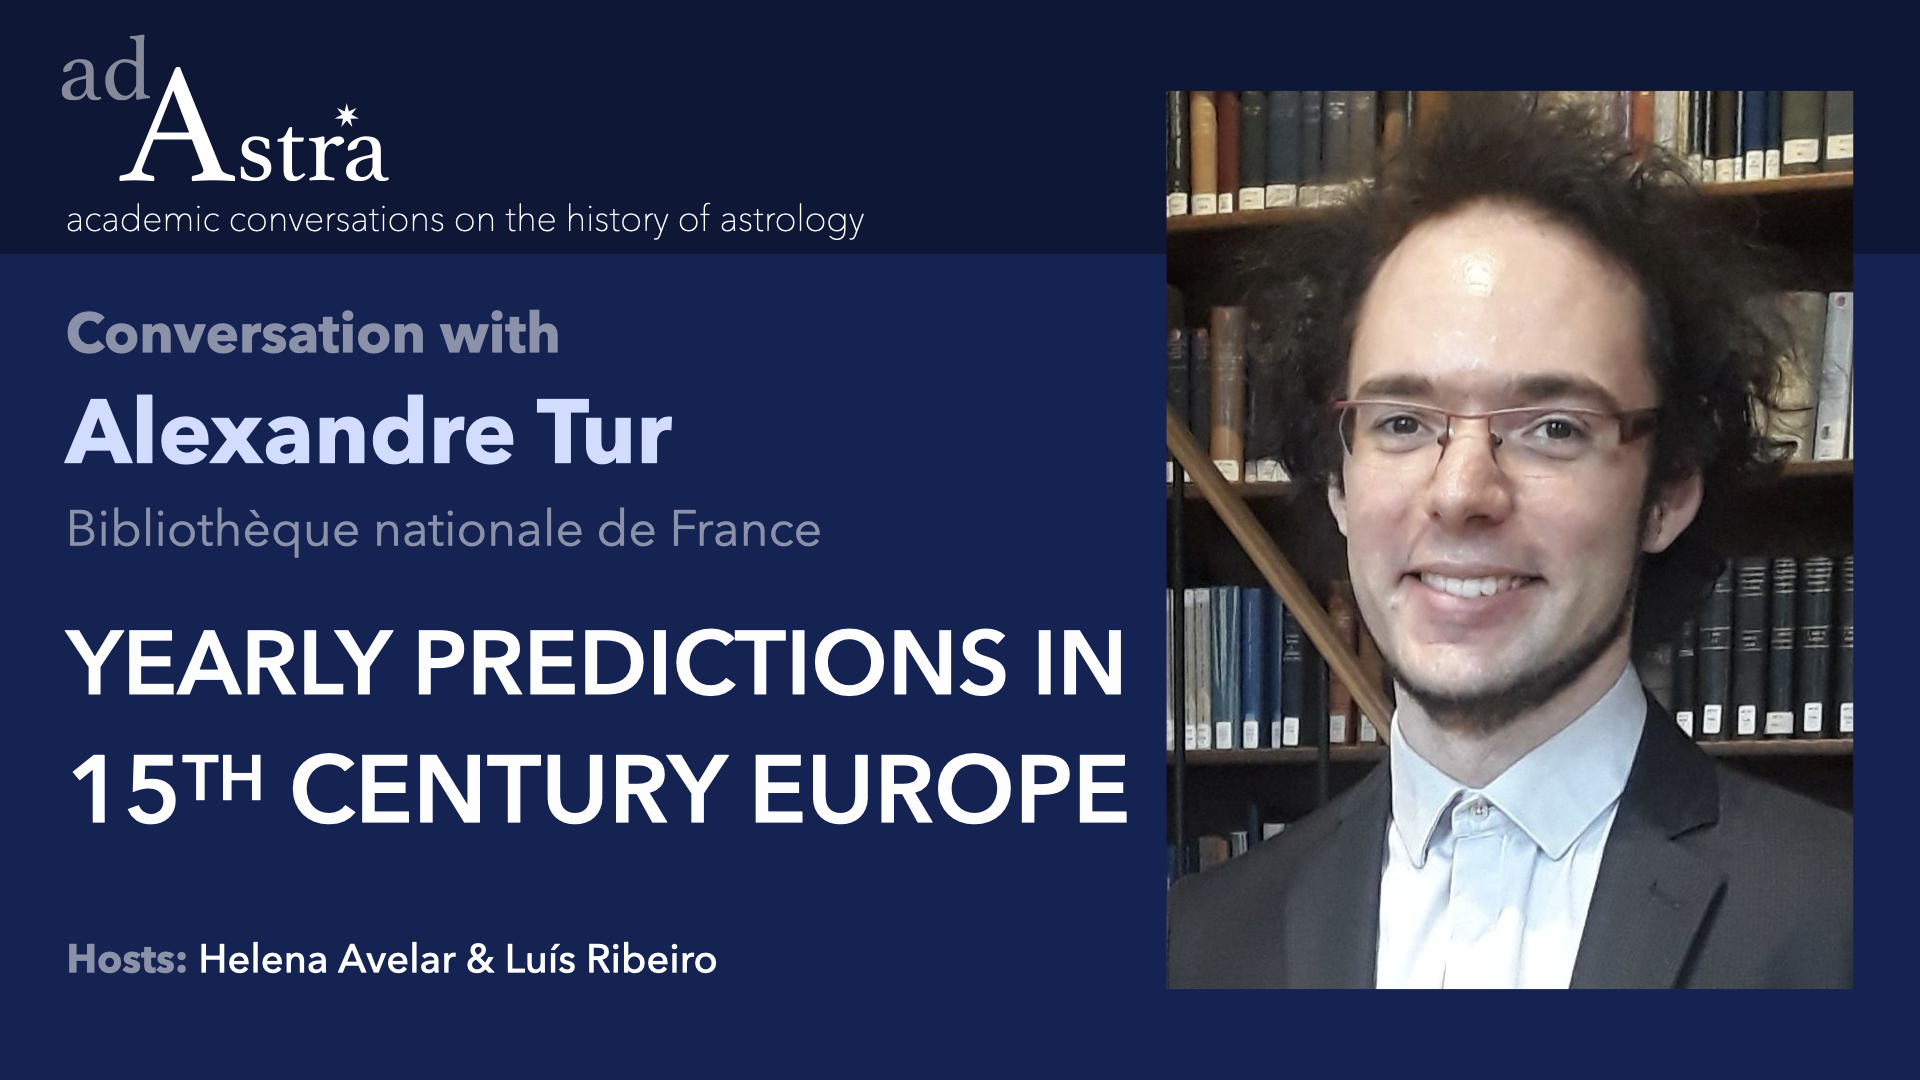 Yearly Predictions in 15th Century Europe with Alexandre Tur